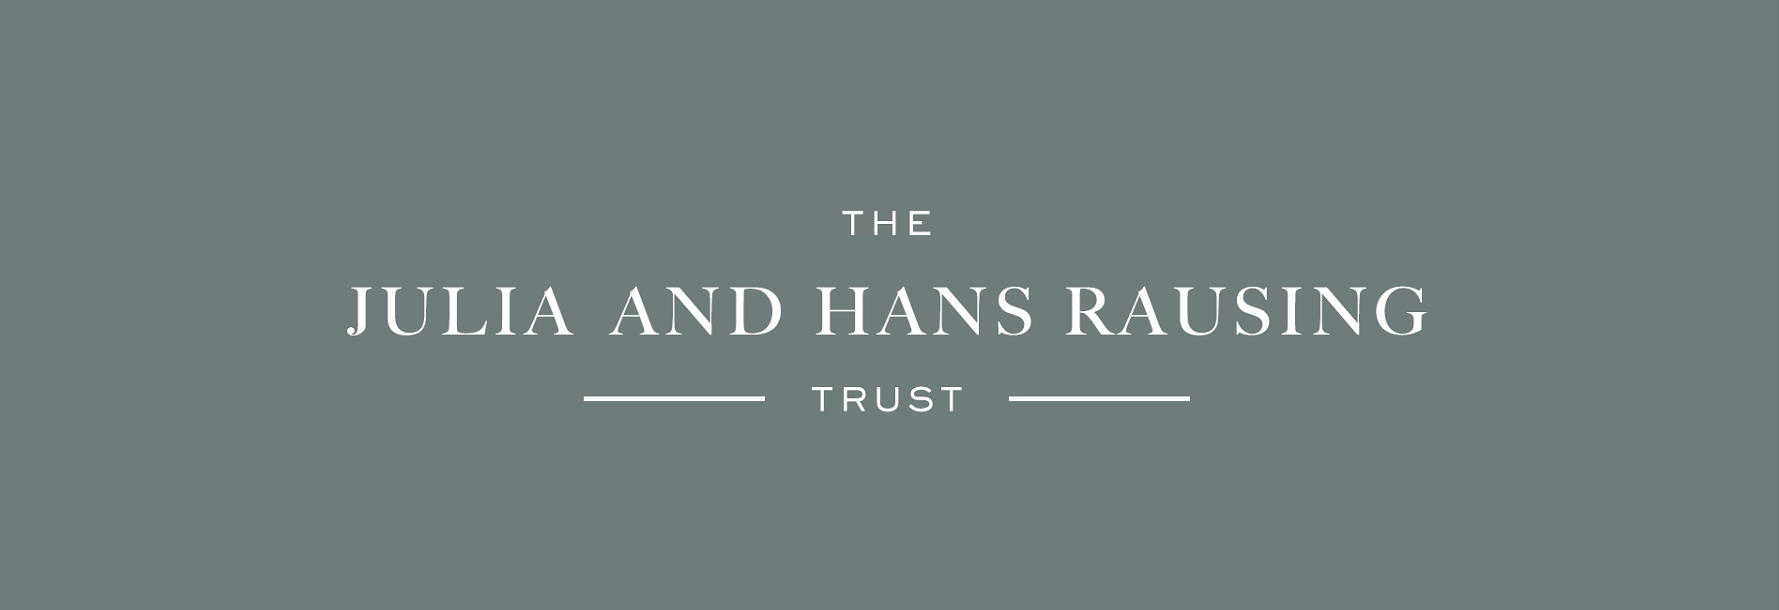 The Julia and Hans Rausing Trust brand identity